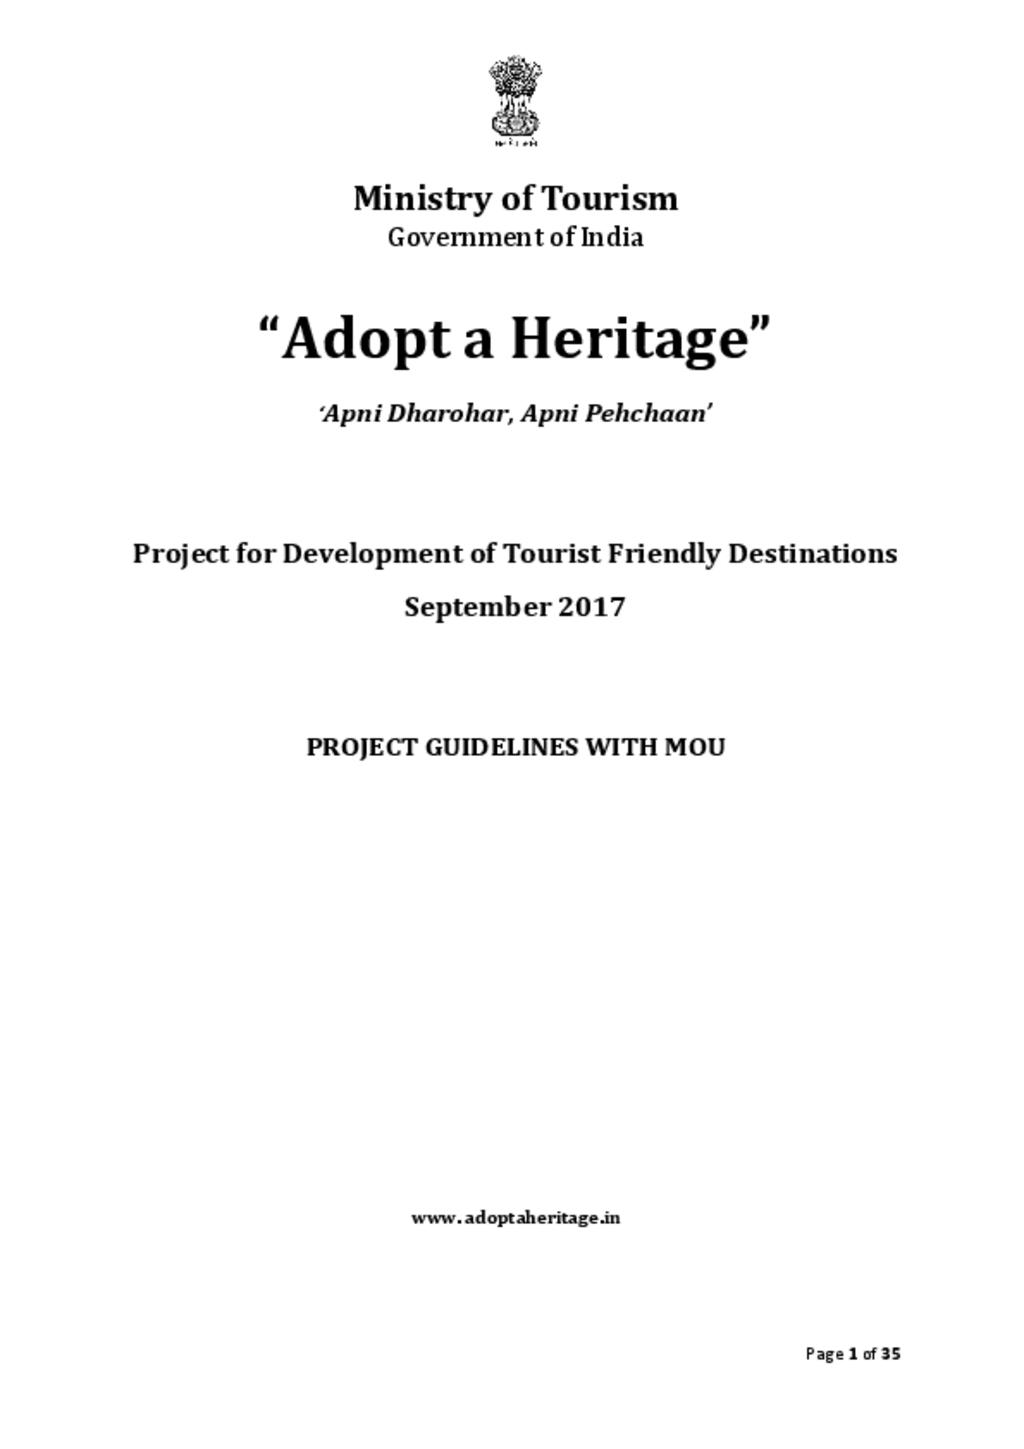 Adopt a Heritage Guidelines